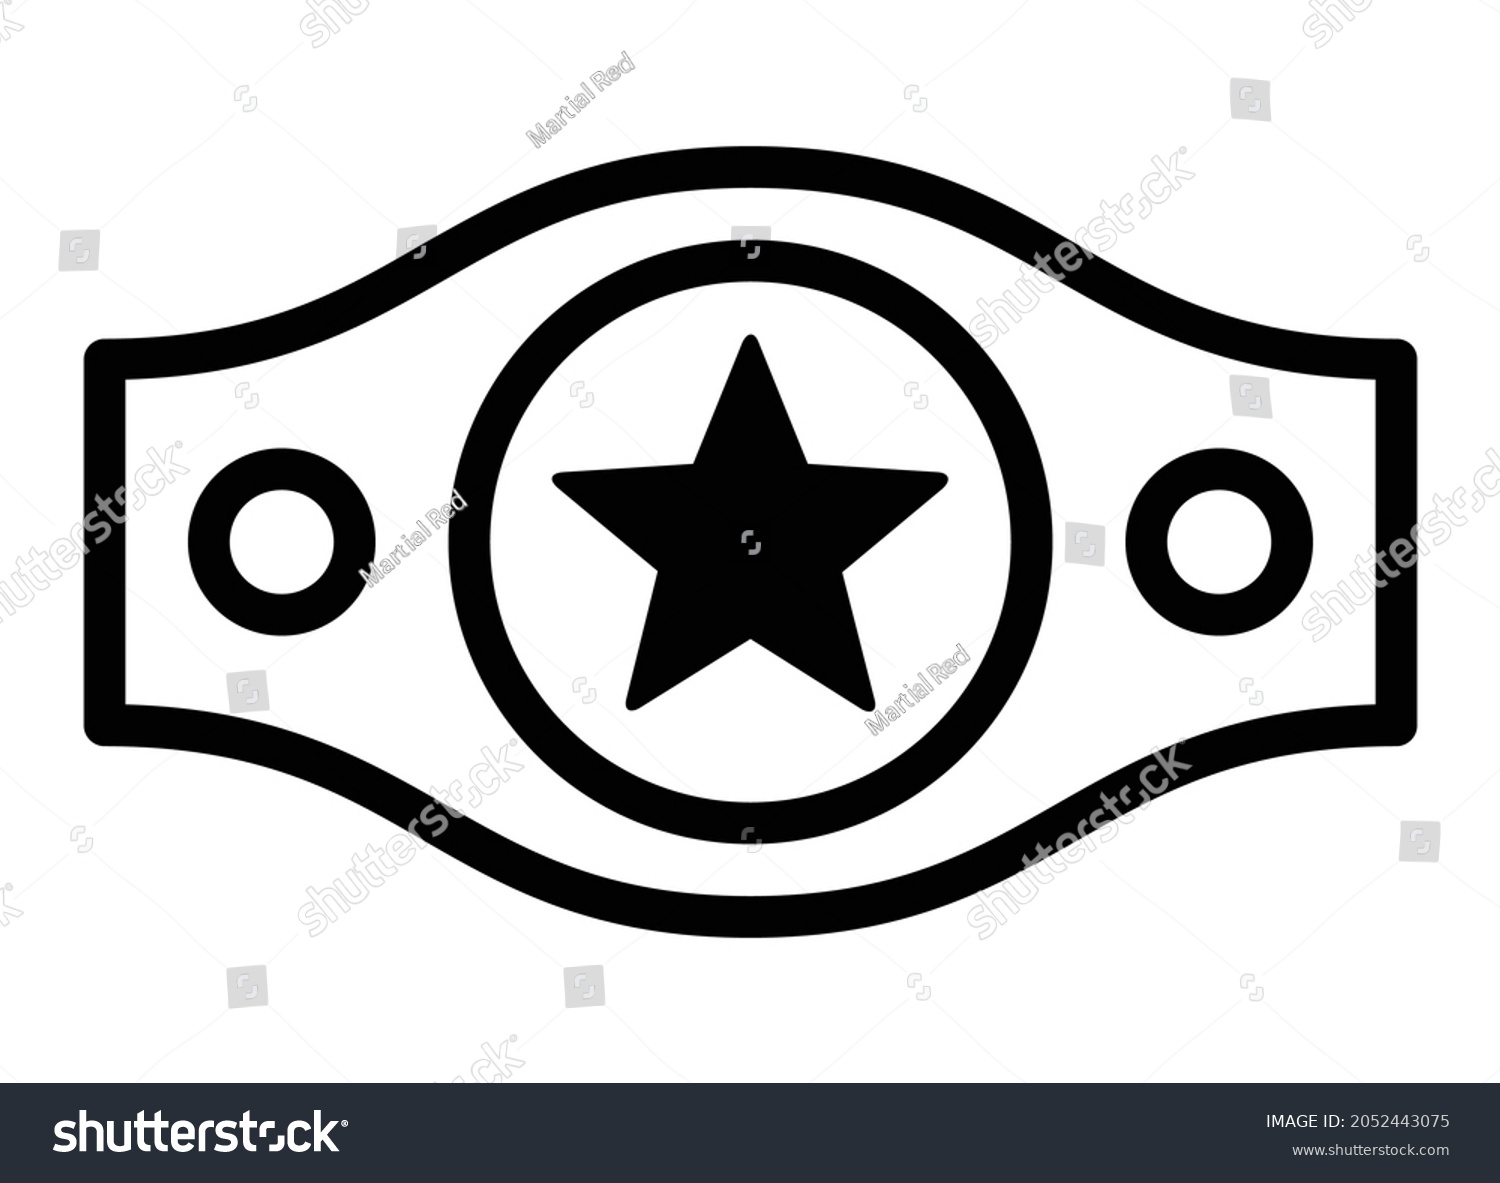 SVG of Boxing or wrestling championship belt with star line art vector icon for sports apps and websites svg